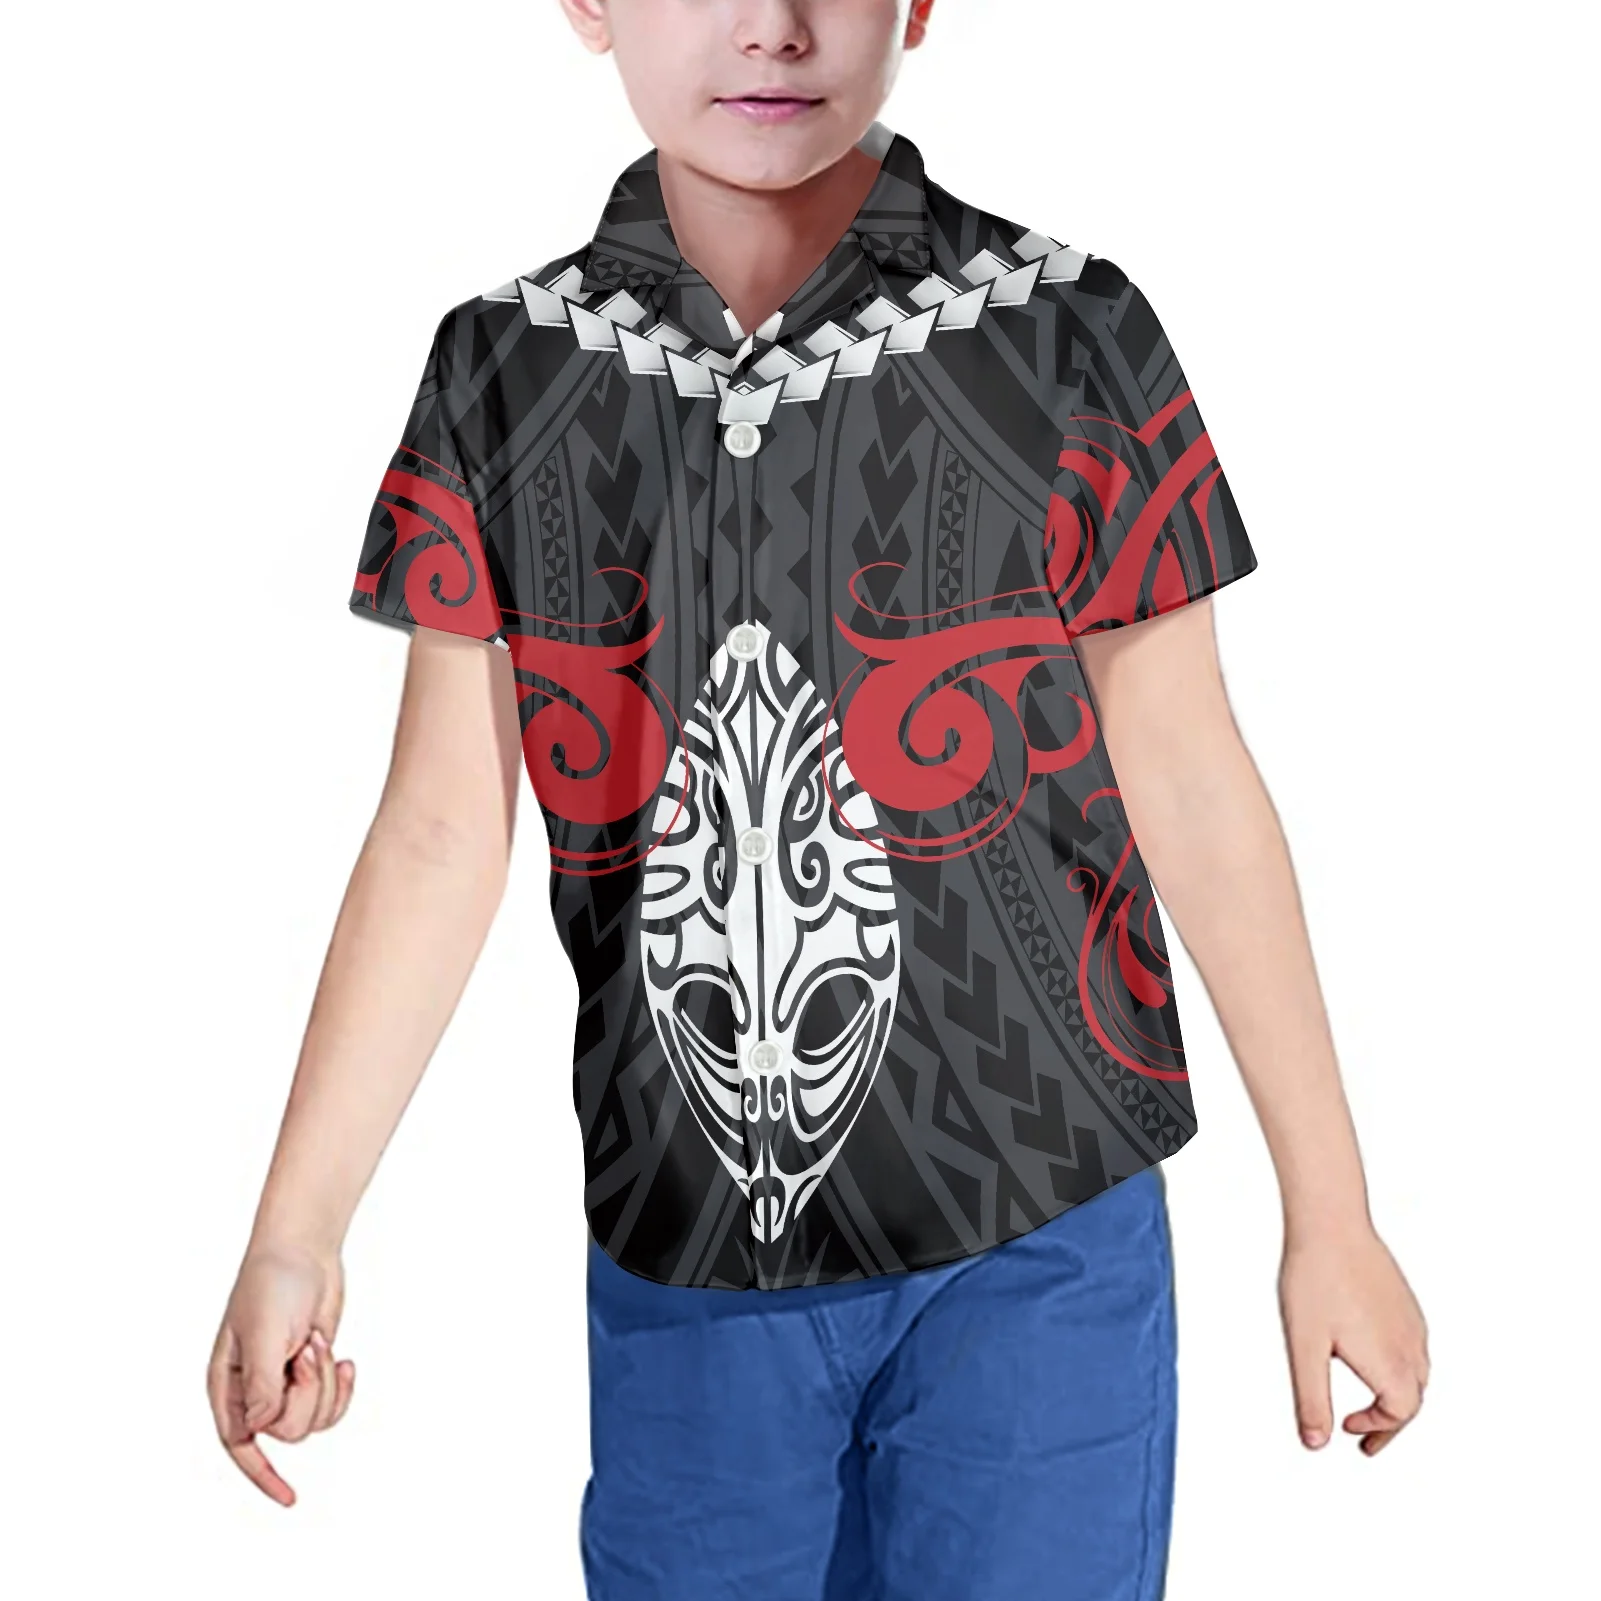 

Hycool Shirt For Boy Hawaii Flower Polynesian Tribal Print Fashion Clothes For Teenagers New Arrivals Summer Tops For Children